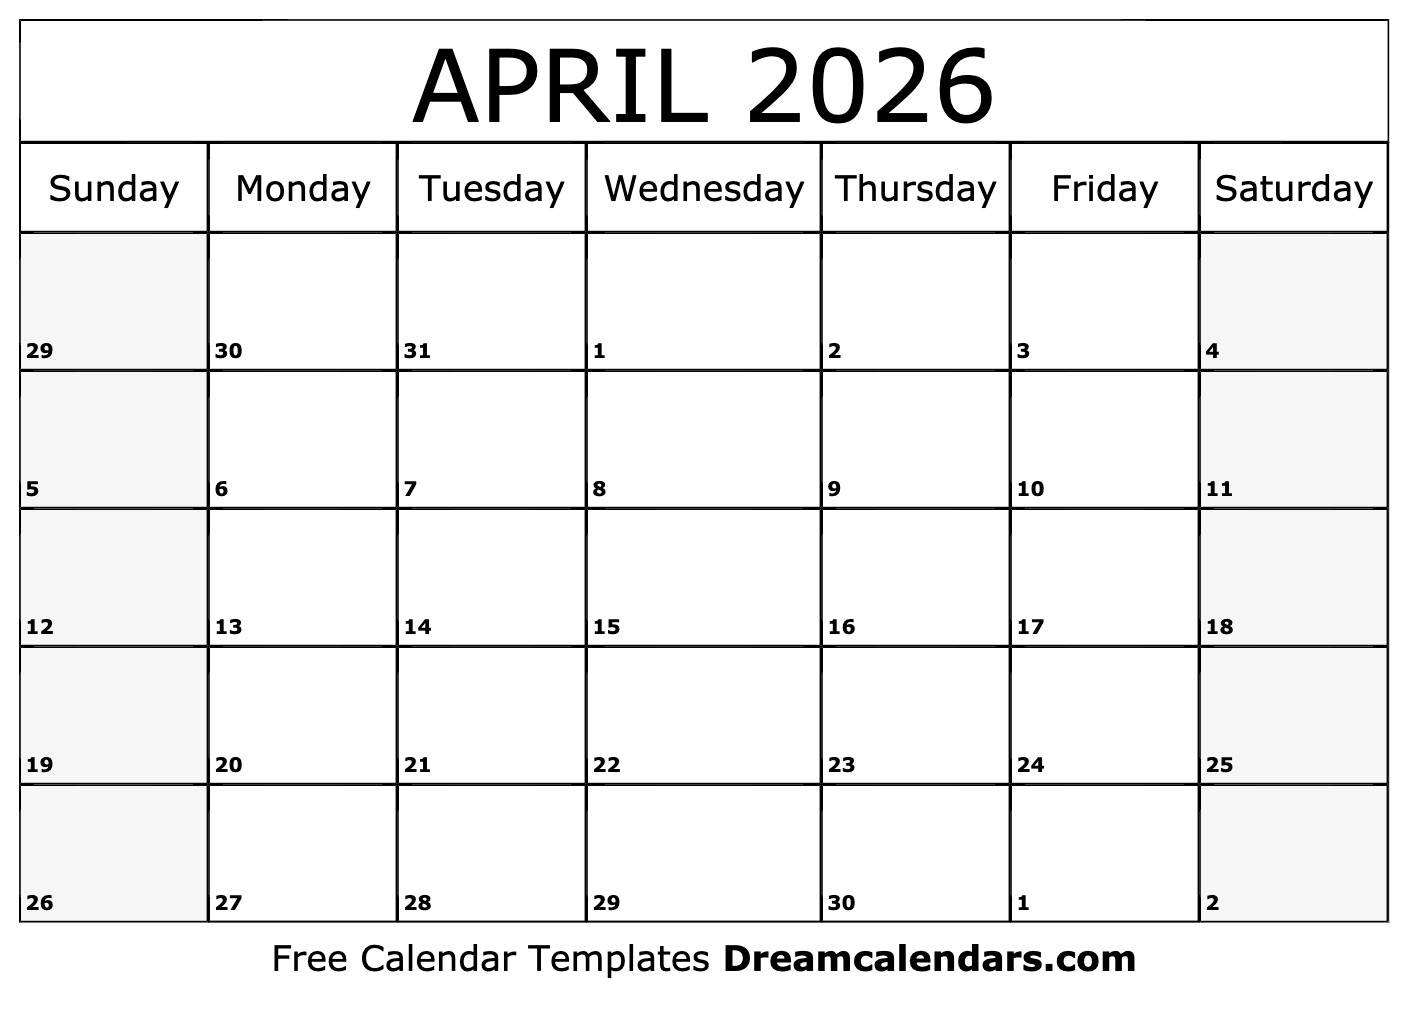 April 2026 Calendar Free Printable with Holidays and Observances